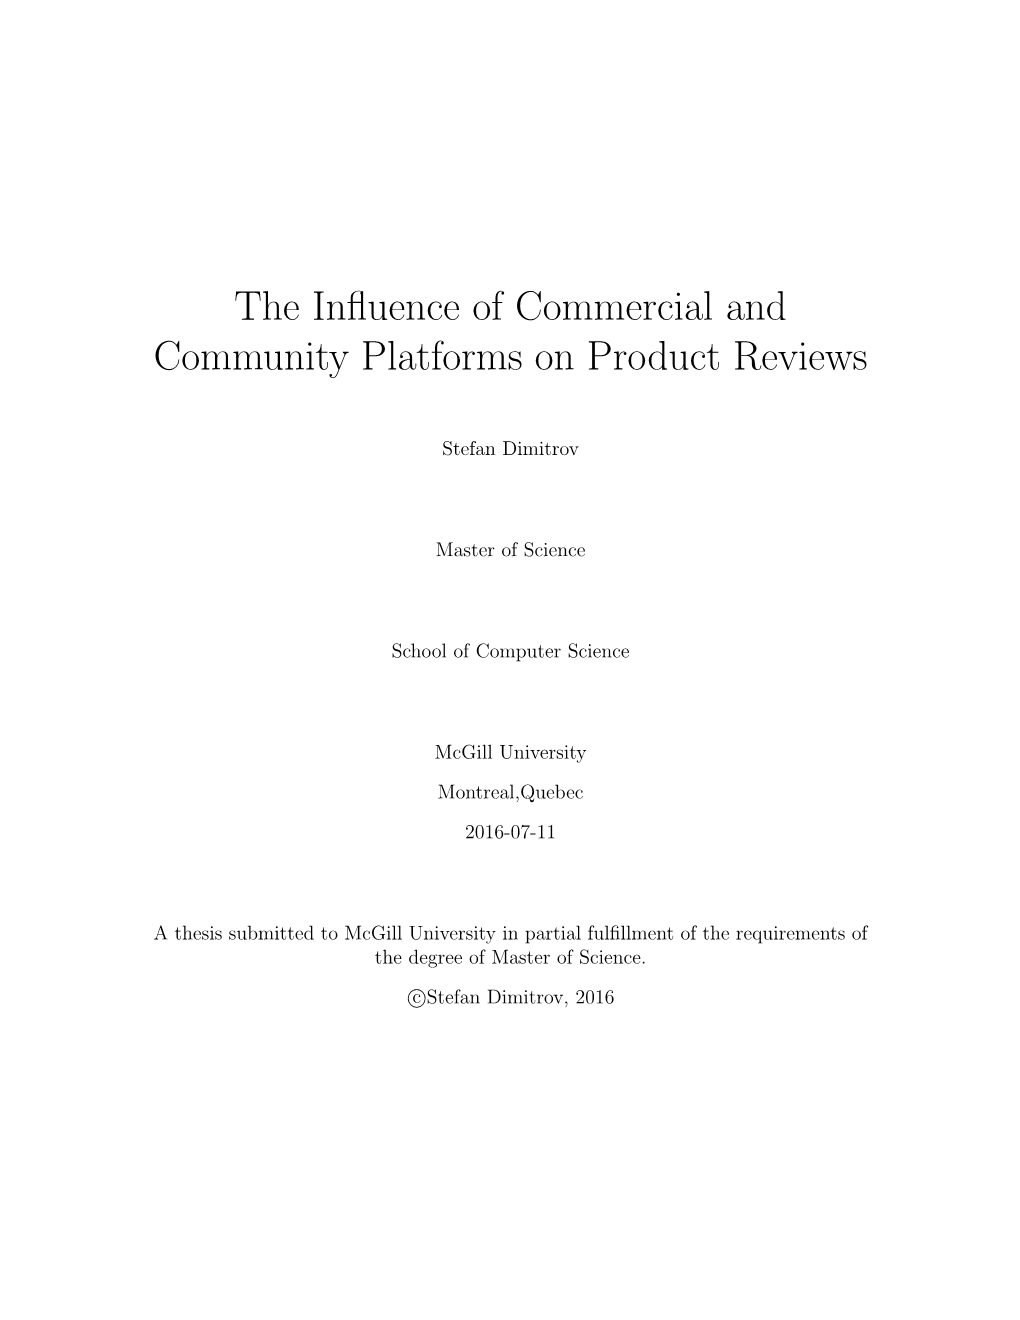 The Influence of Commercial and Community Platforms on Product